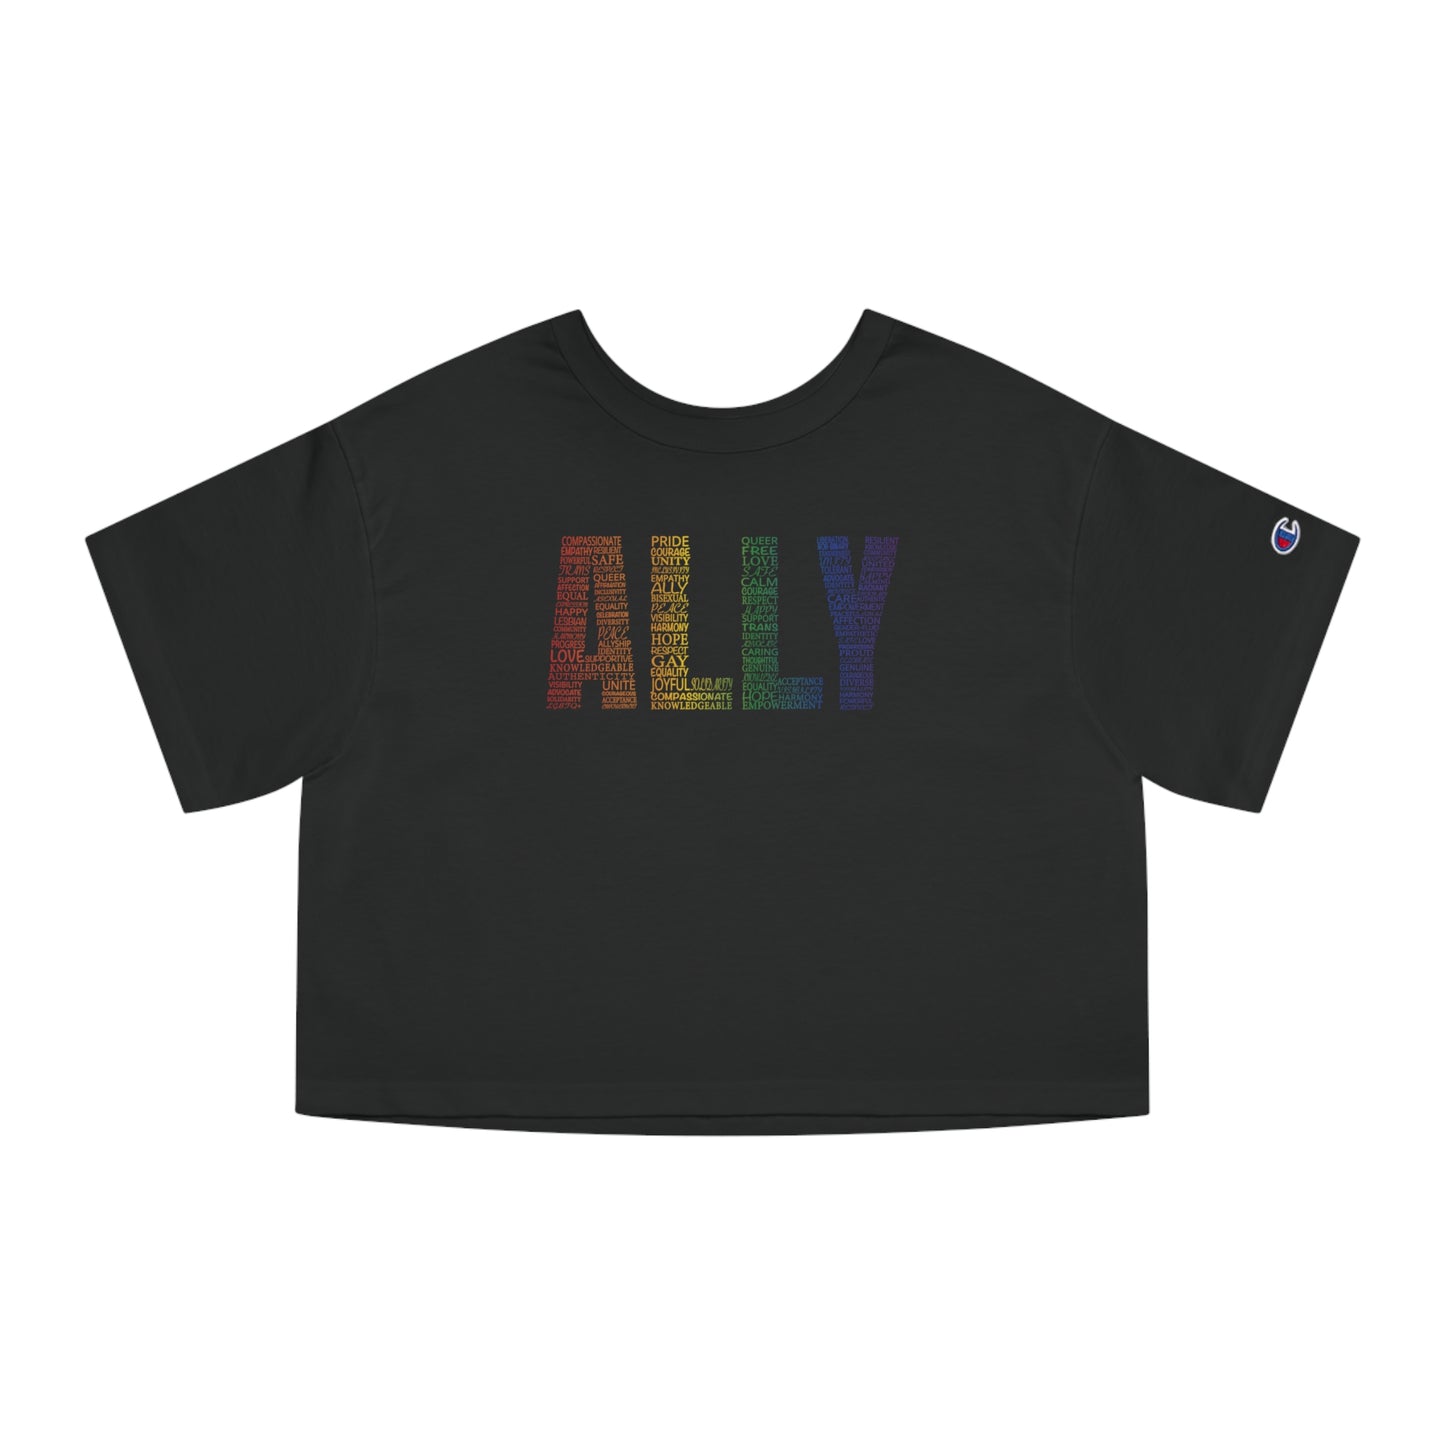 Ally Calligram Cropped T-Shirt